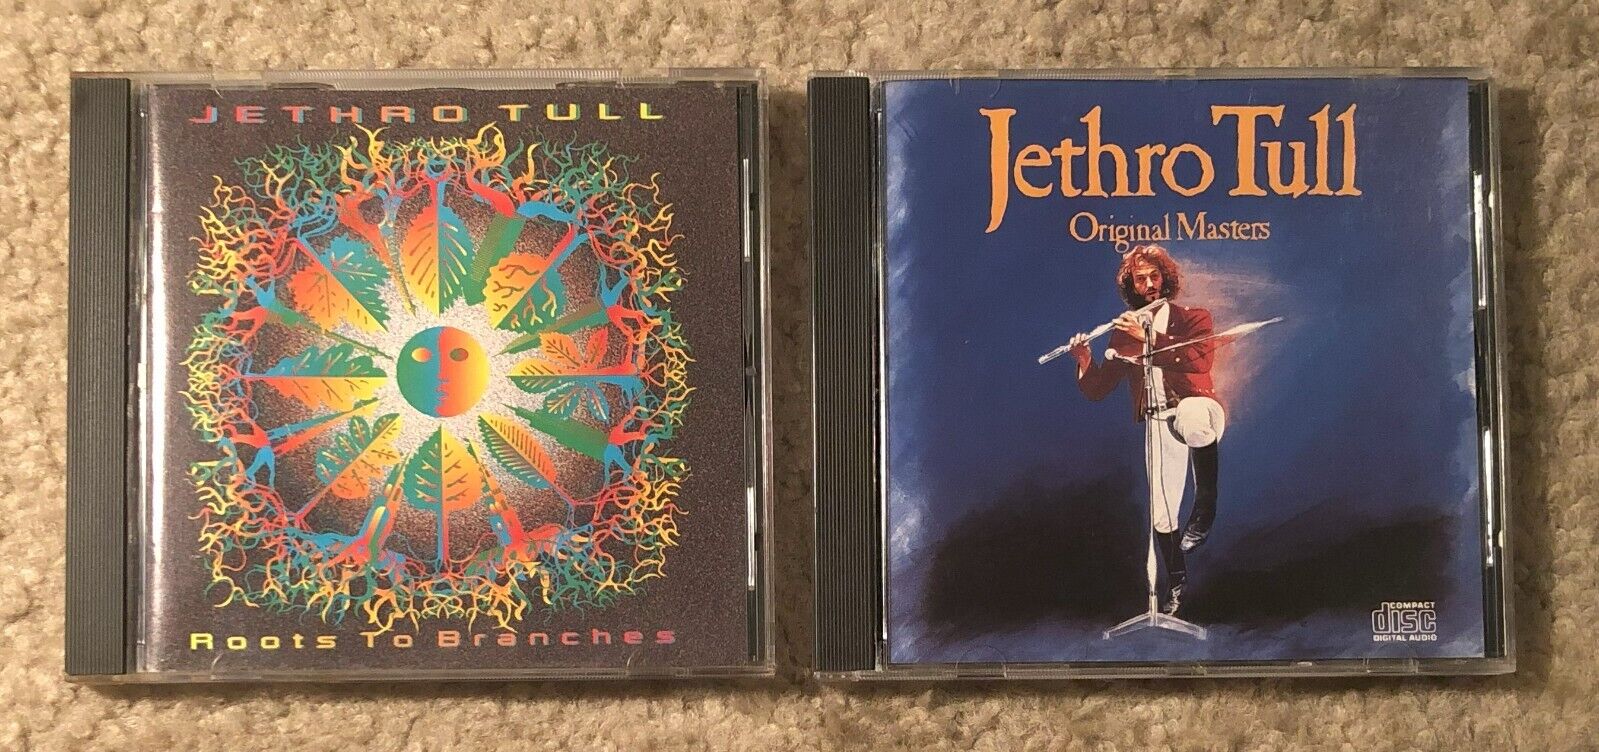 Jethro Tull 2 CD Lot - Original Masters & Roots To Branches - Excellent